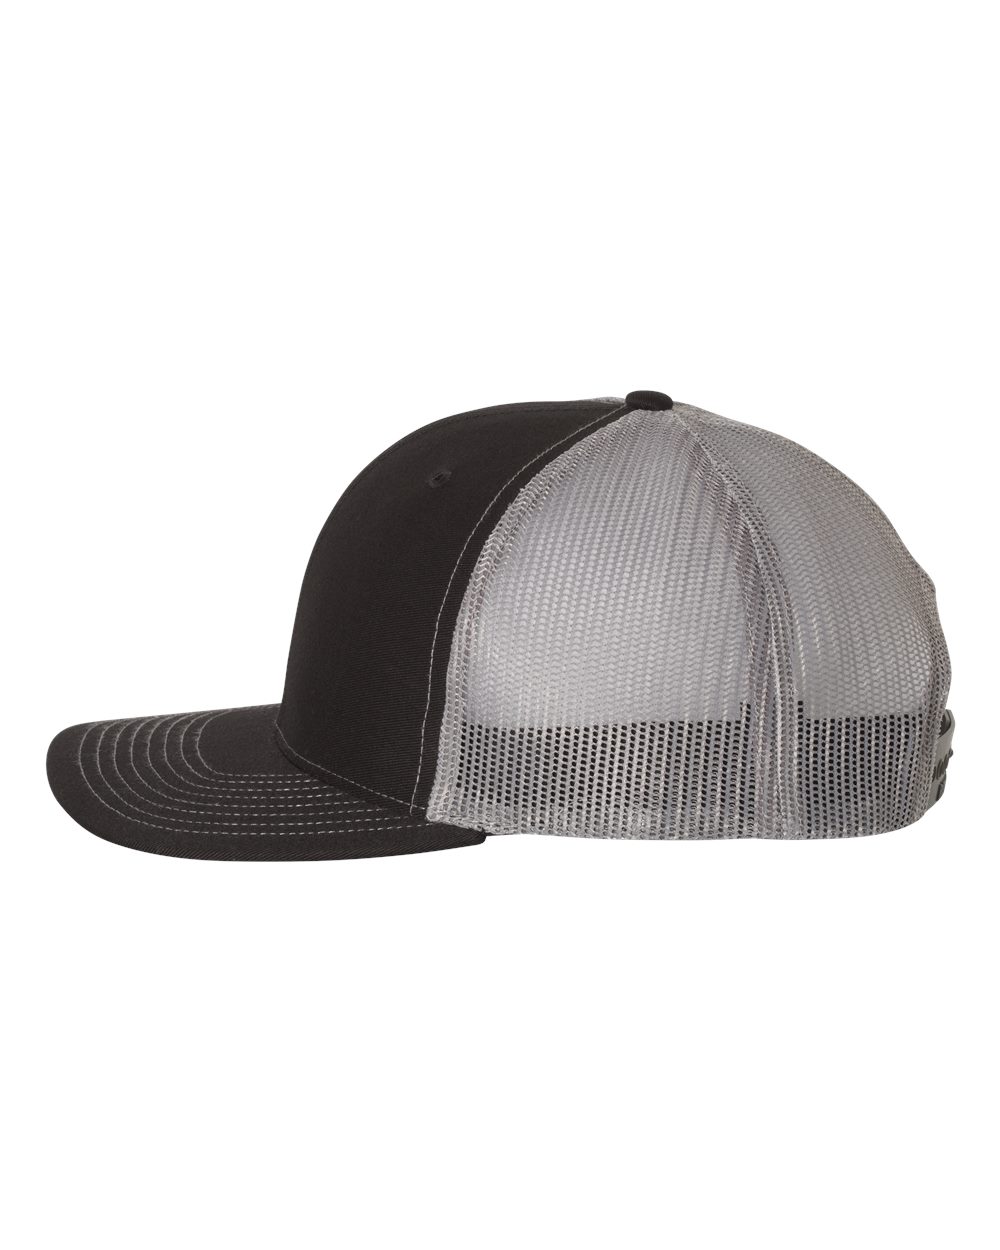 Kelly Hughes Stateline Richardson Cap Black/Charcoal with Dark Brown Patch